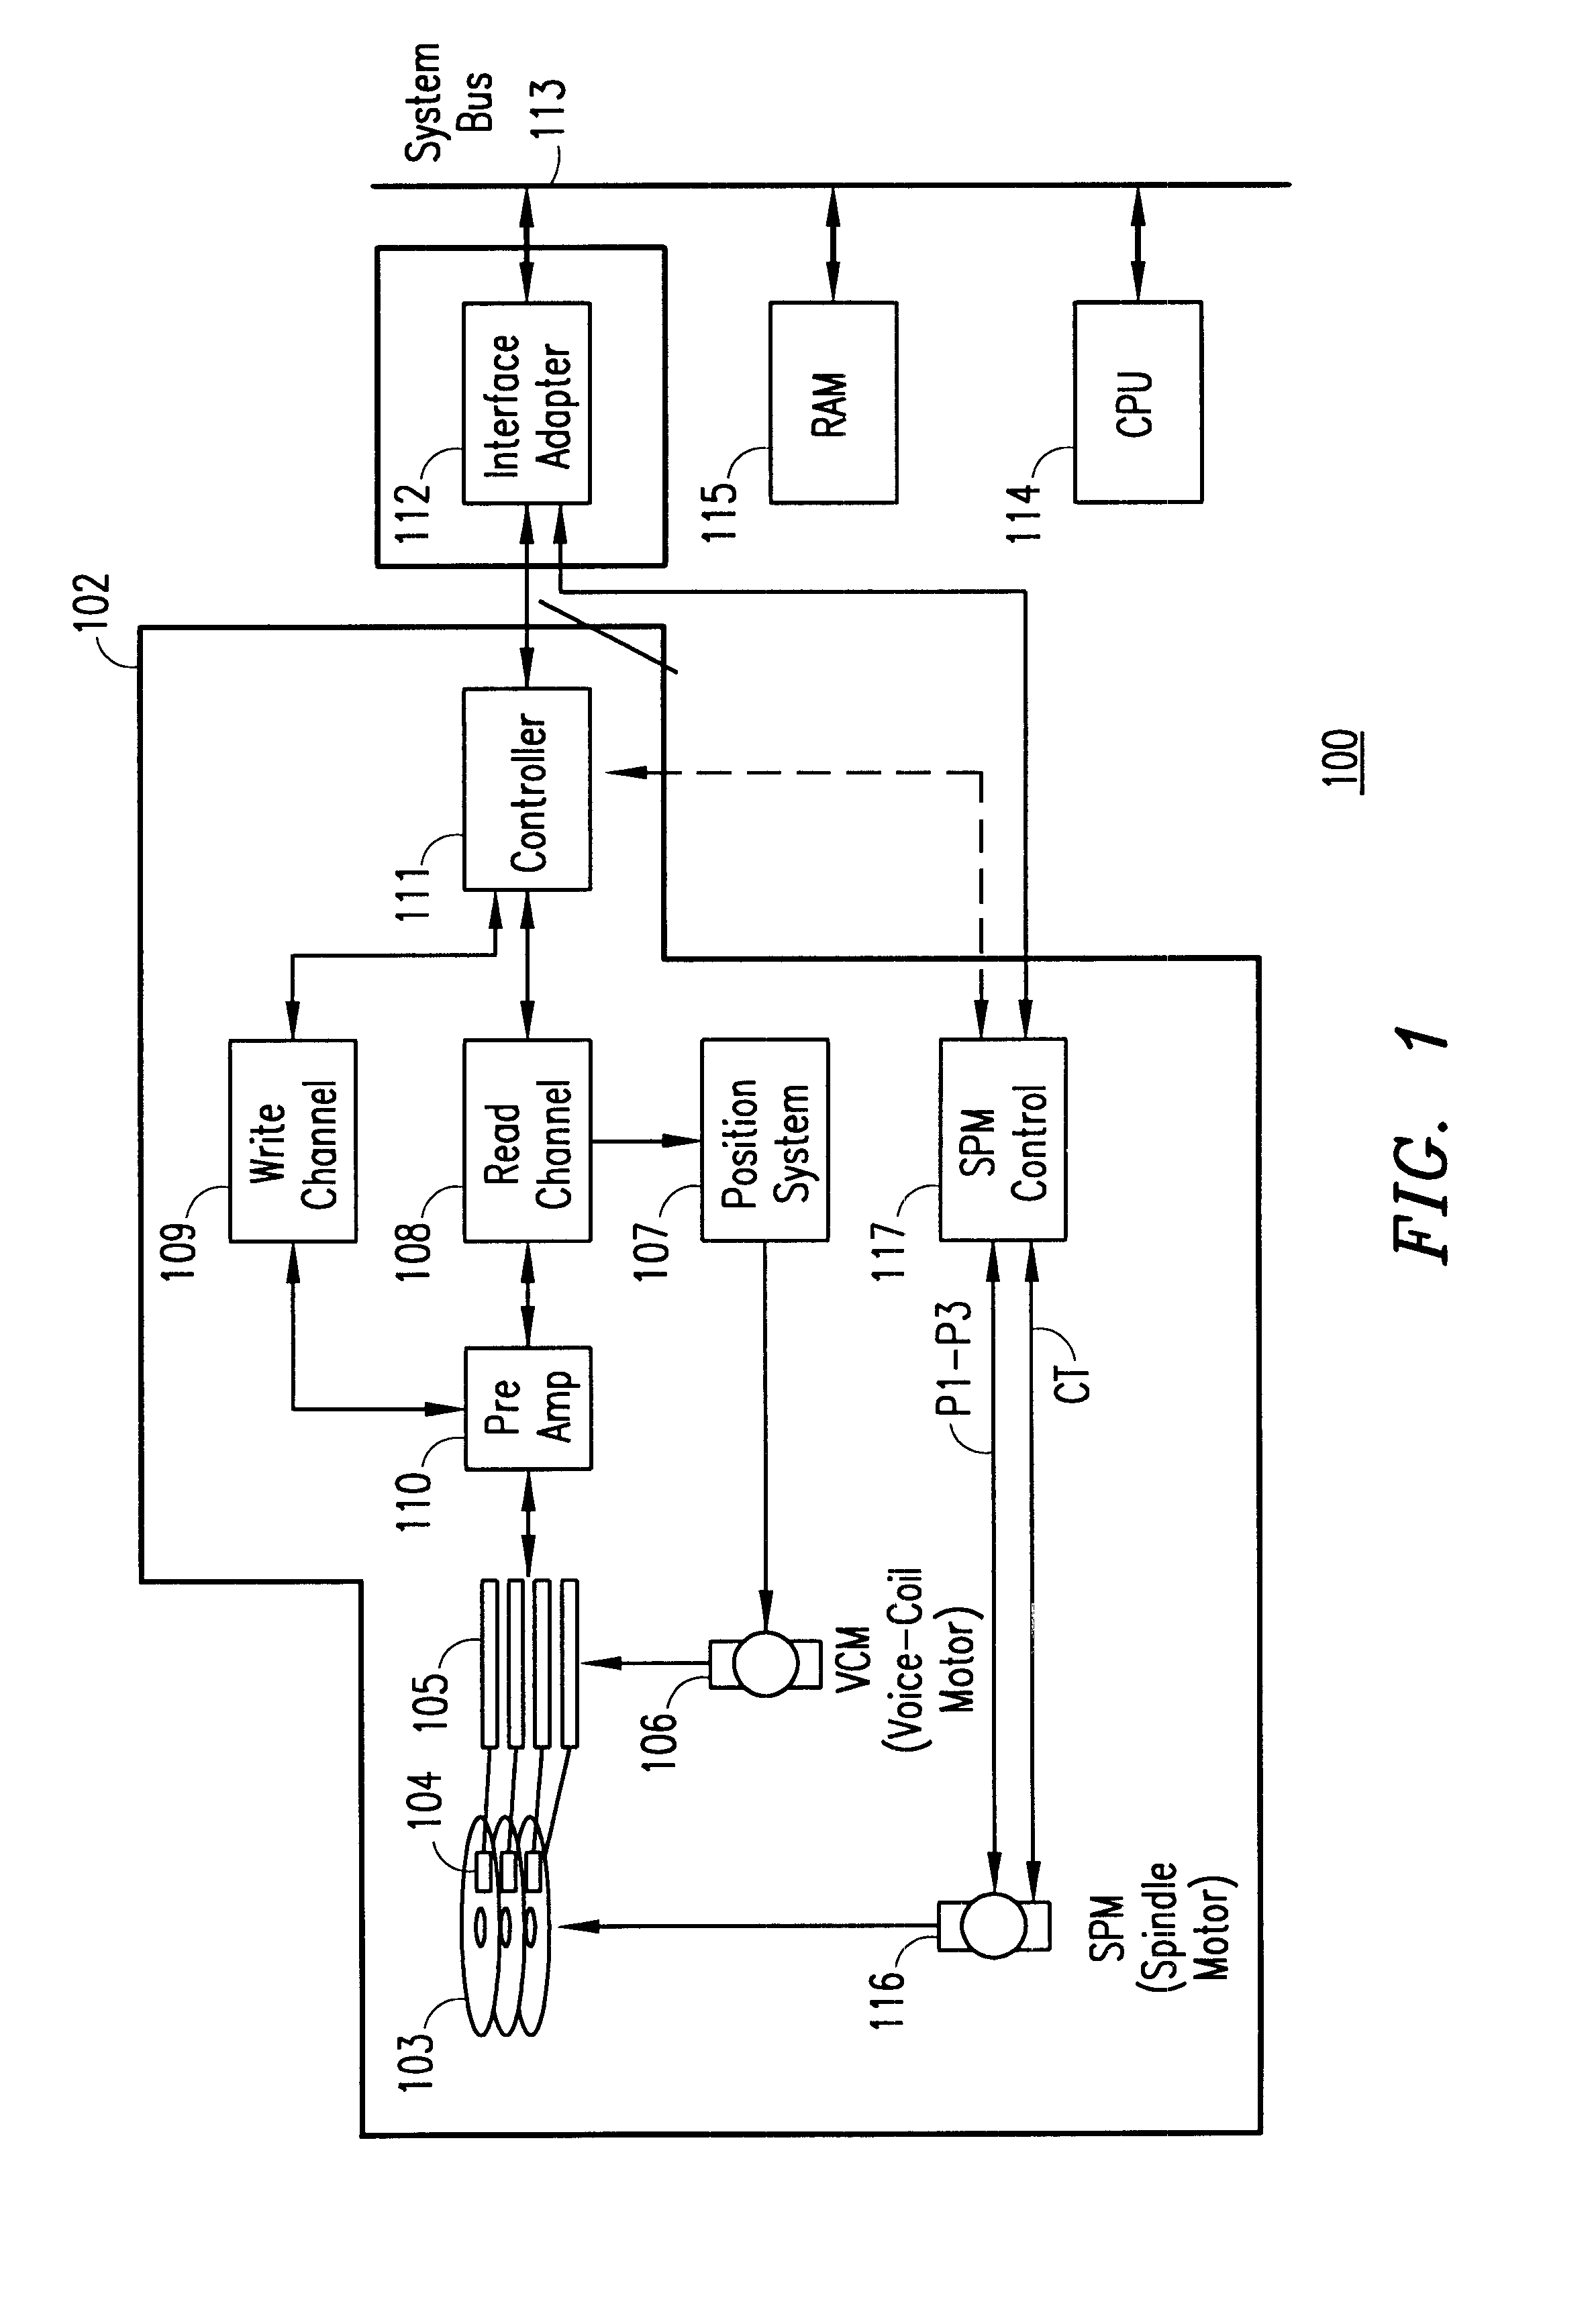 Circuit and method for detecting backward spin of a spindle motor for a disk drive